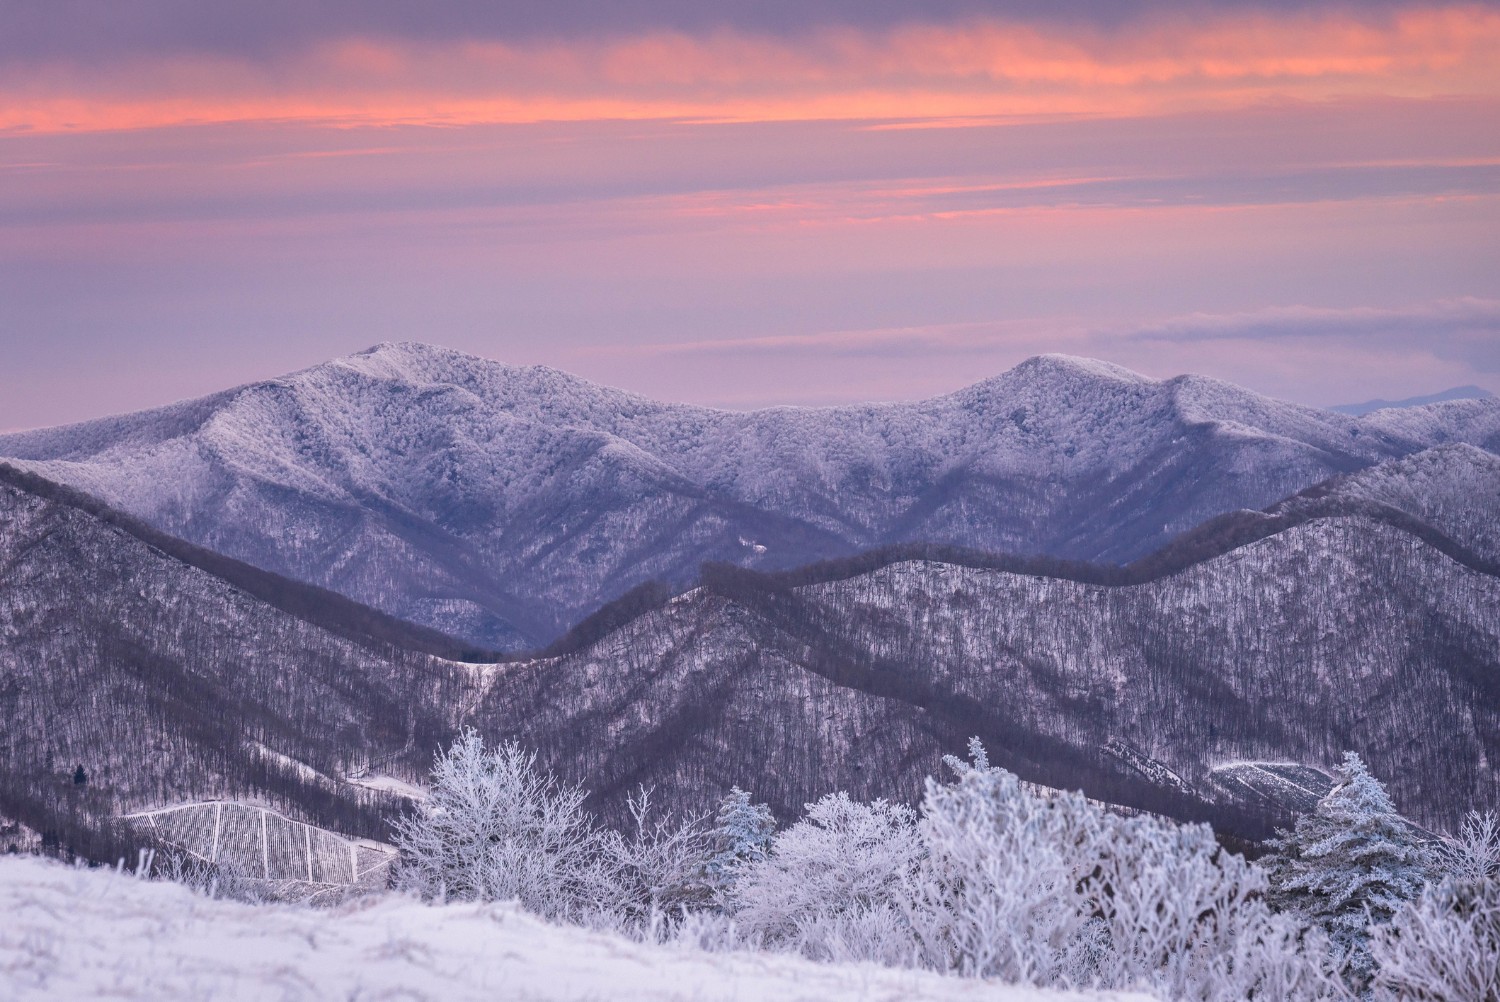 Appalachian Mountain landscape covered in snow